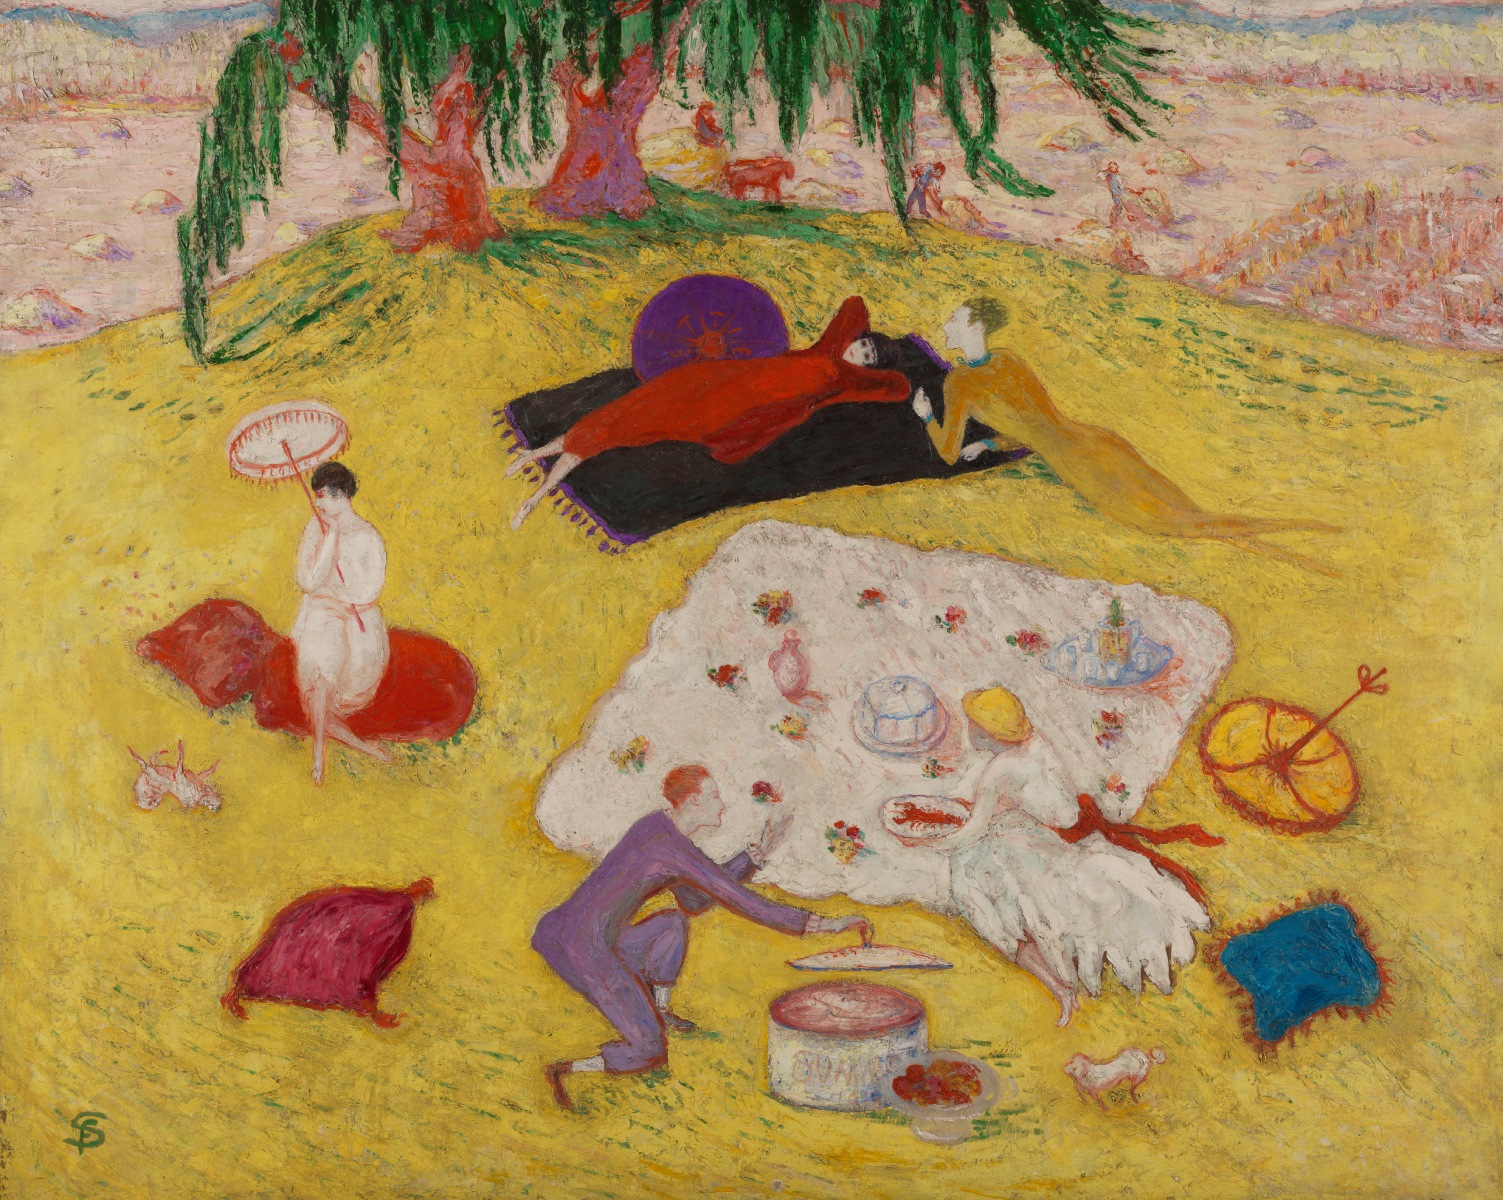 Picnic at Bedford Hills by Florine Stettheimer - 1918 - 102.4 x 127.6 cm Pennsylvania Academy of the Fine Arts